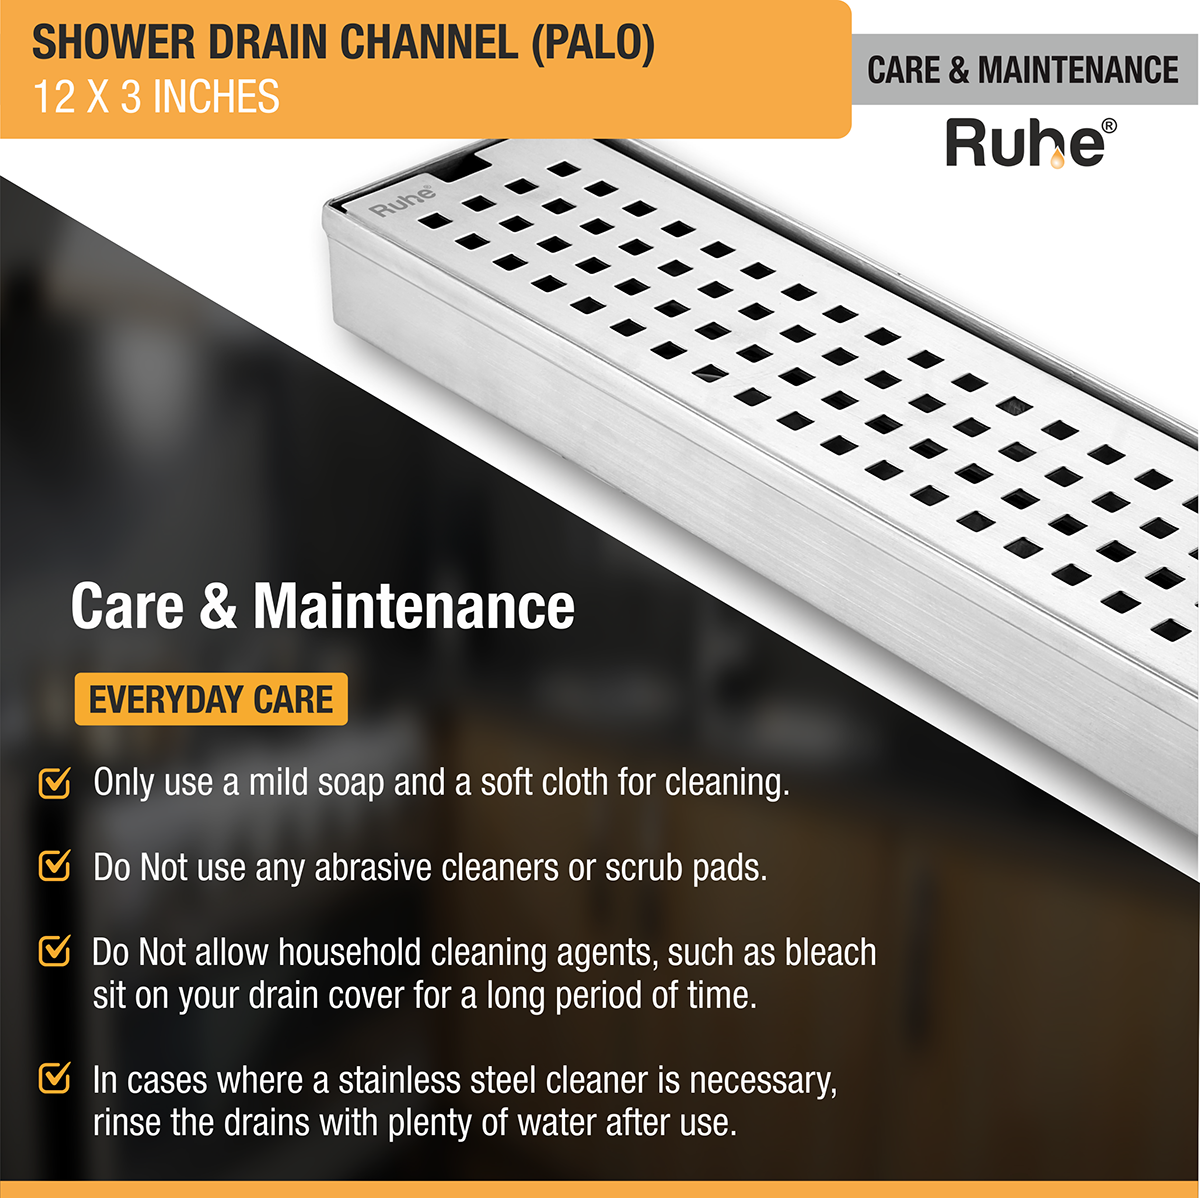 Palo Shower Drain Channel (12 x 3 Inches) with Cockroach Trap (304 Grade) care and maintenance